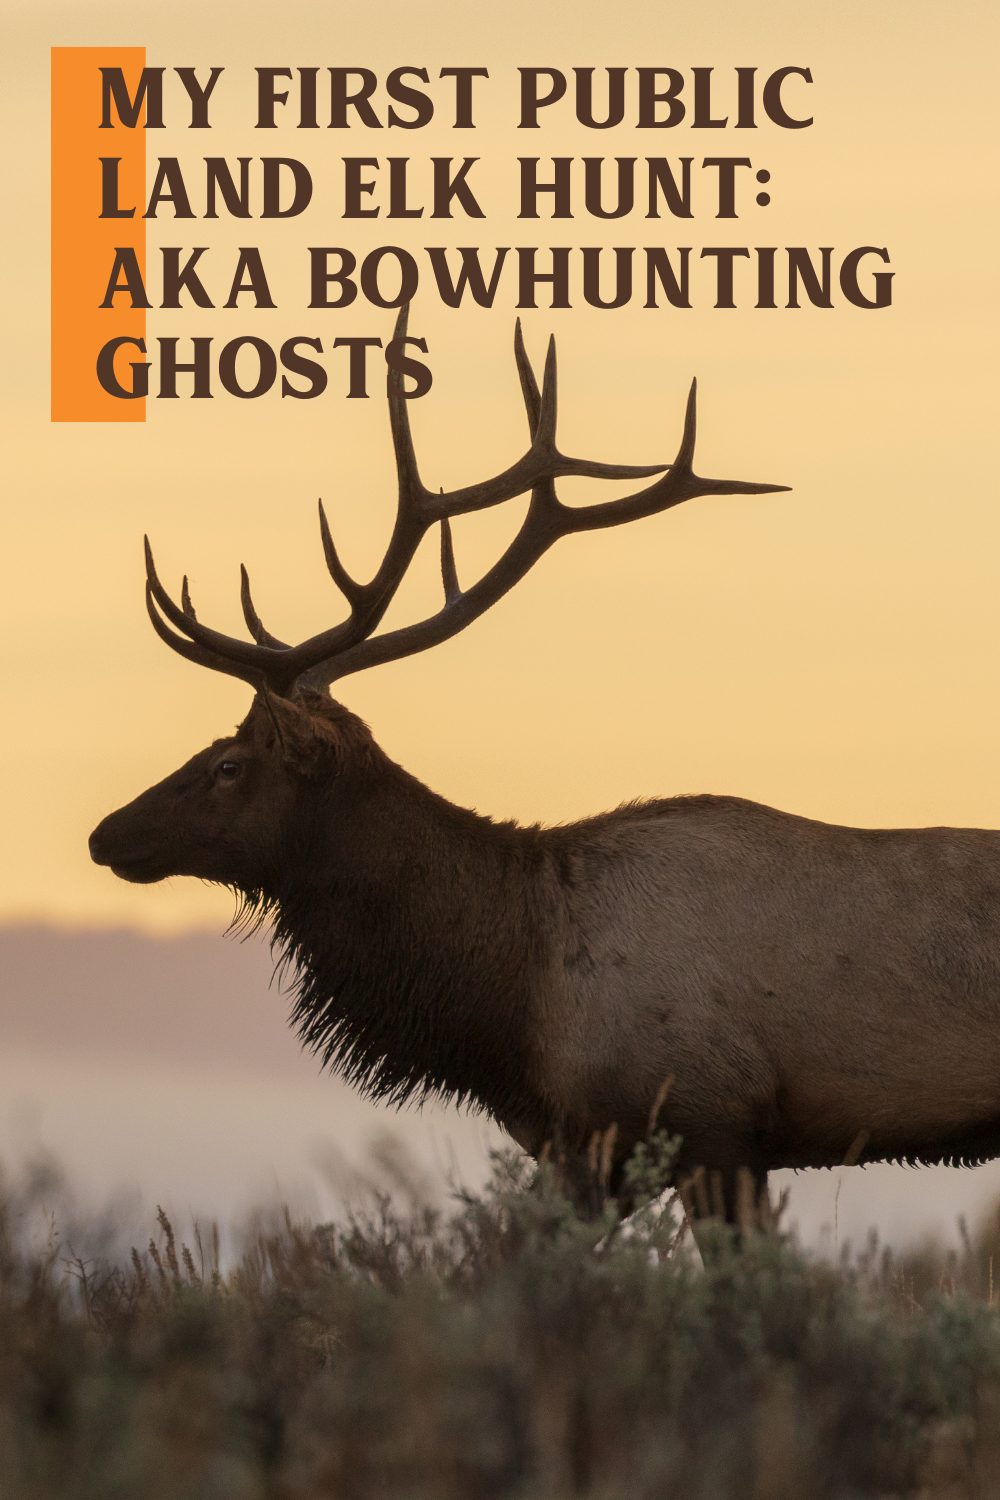 My First Public Land Elk Hunt: AKA Bowhunting Ghosts